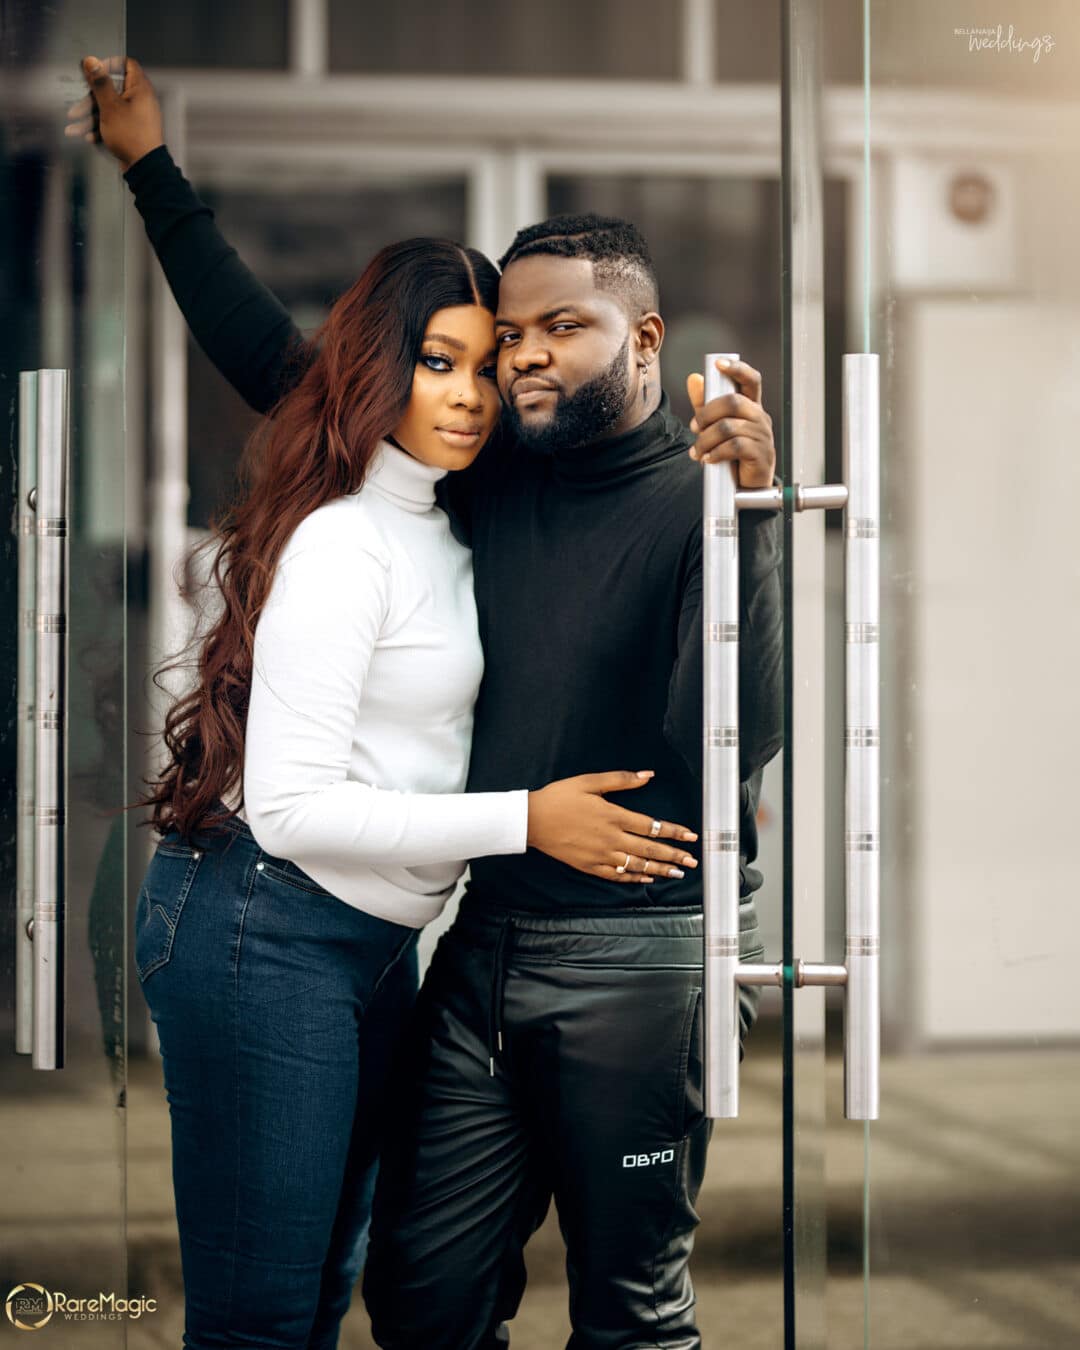 Show same care in real life - Skales calls out his wife for mourning his mother on Instagram